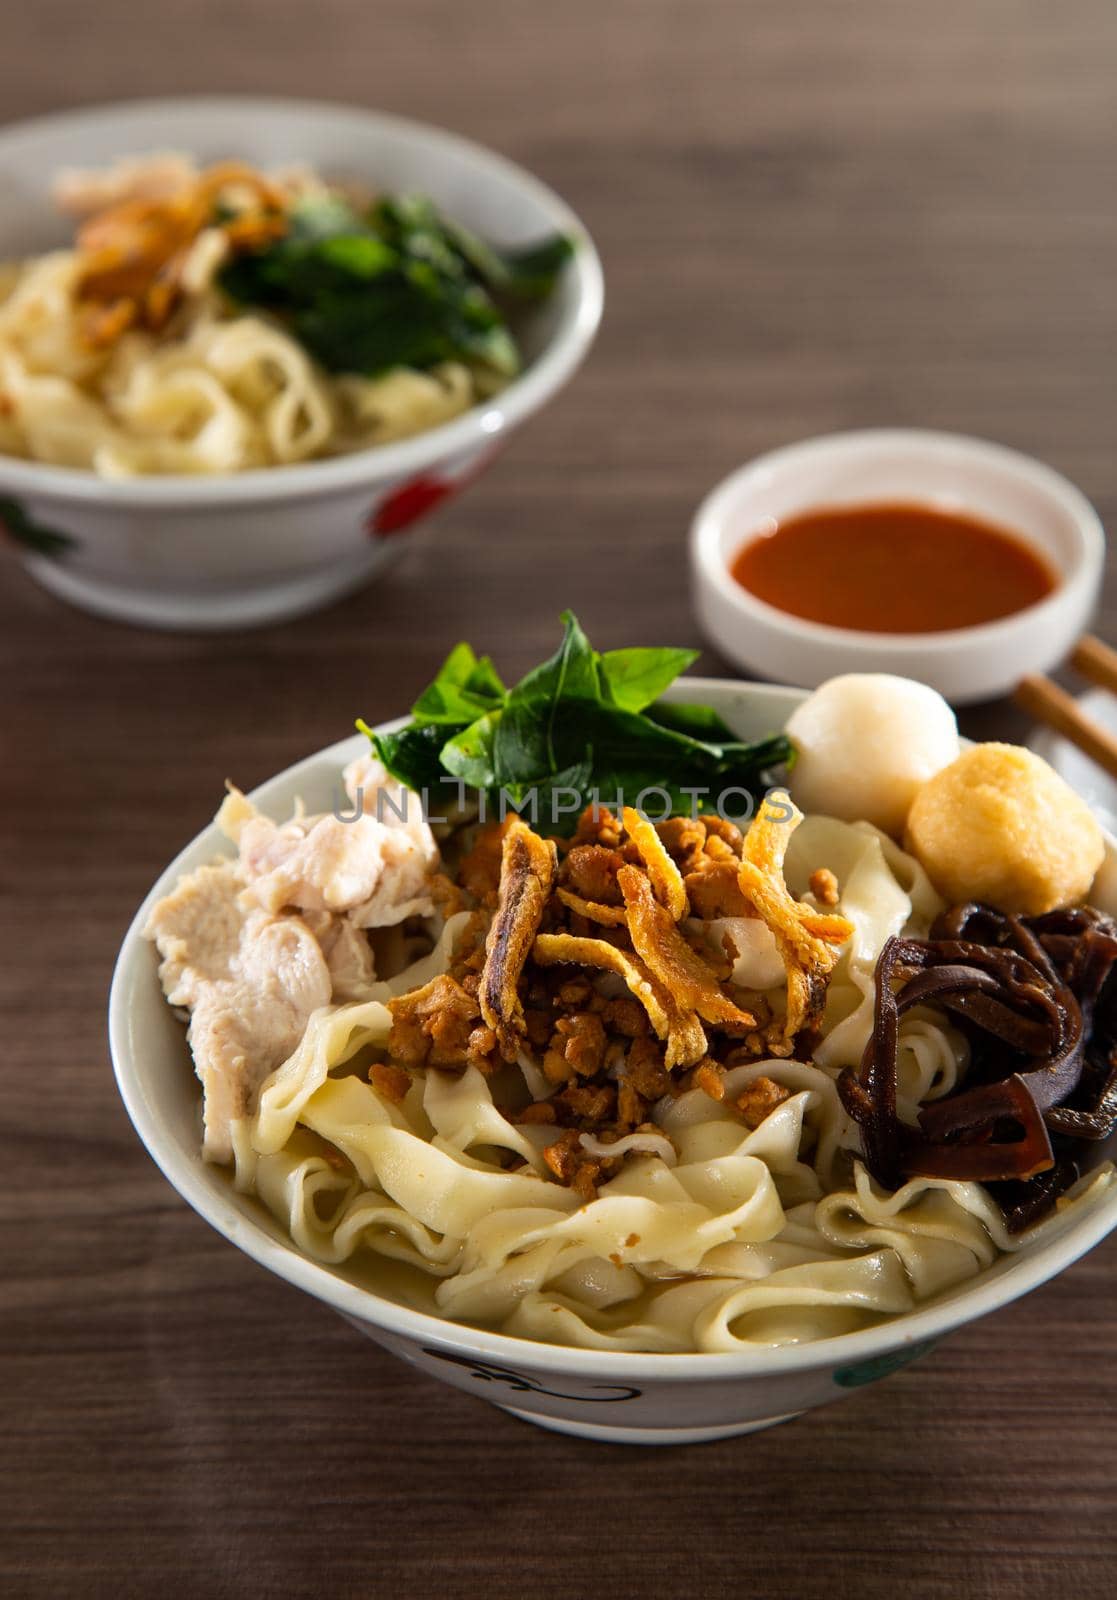 Malaysia hawker food - Pan Mee is made with a simple flour-based dough with anchovy broth by tehcheesiong